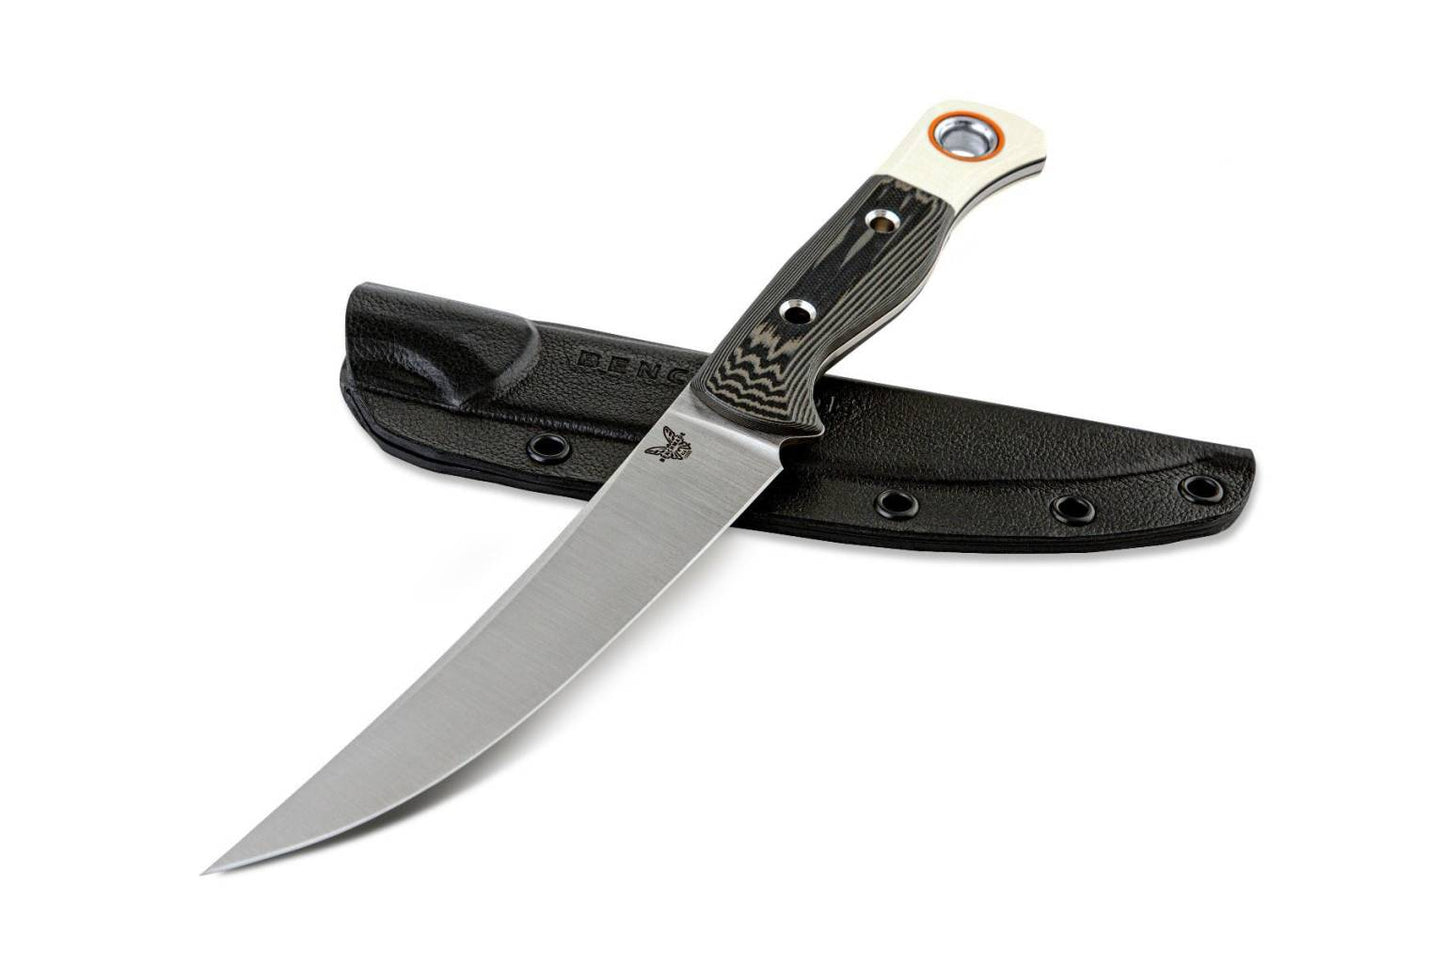 Benchmade - 15500-1 Meatcrafter Knife, Trailing Point Blade, Plain Edge, Black/Brown/Ivory G10 Handle